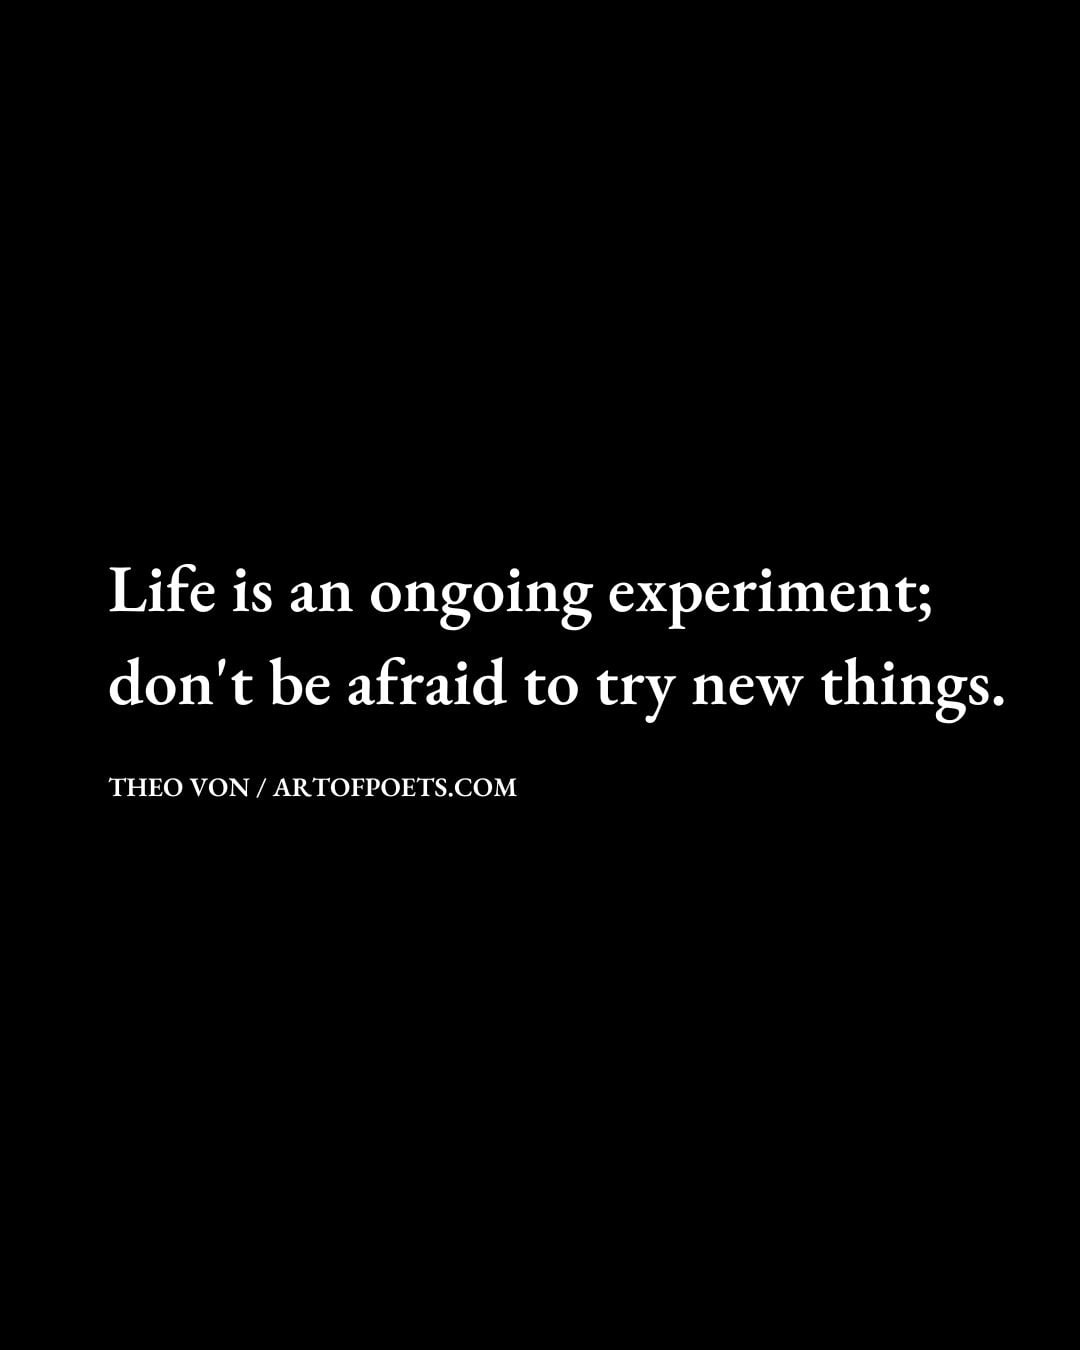 Life is an ongoing experiment dont be afraid to try new things